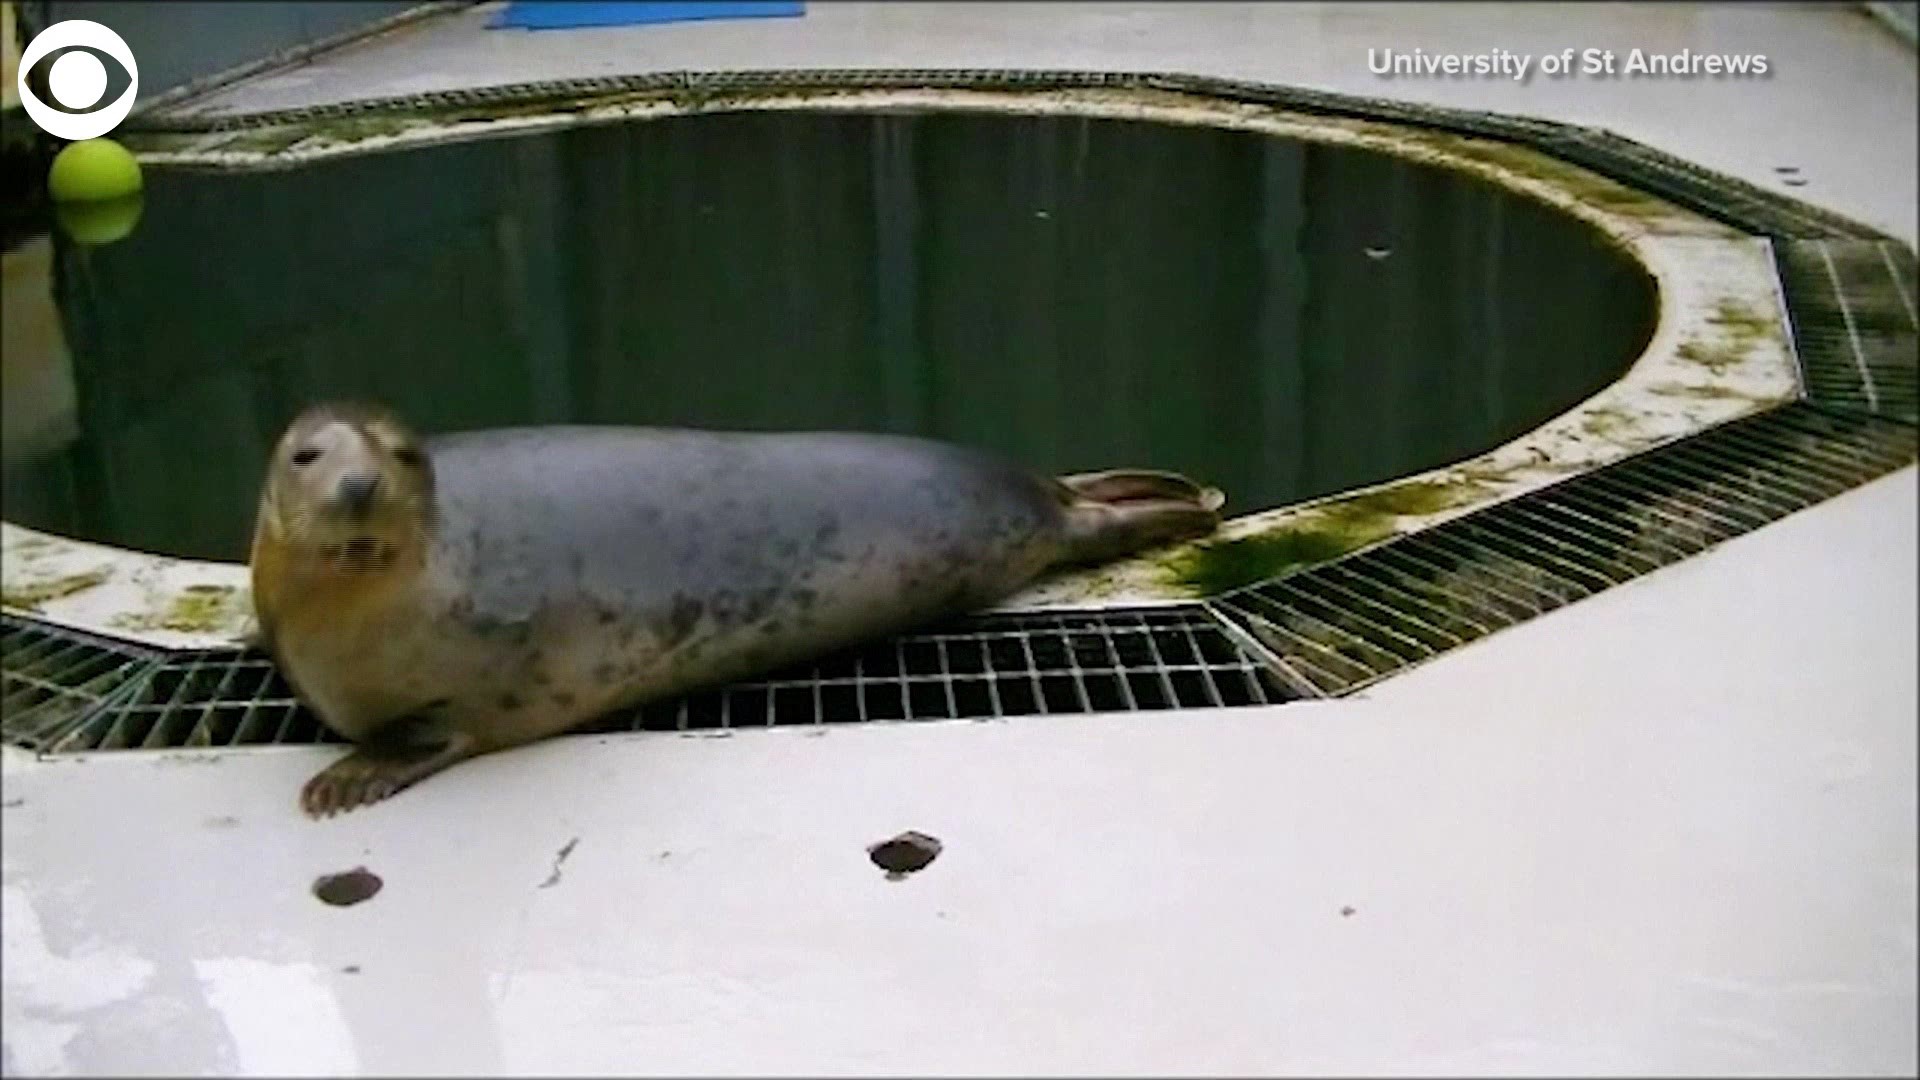 Check out these adorable grey seals singing the Star Wars theme song as they learn how to mimic speech and music. The video was shared by the University of St Andrews.